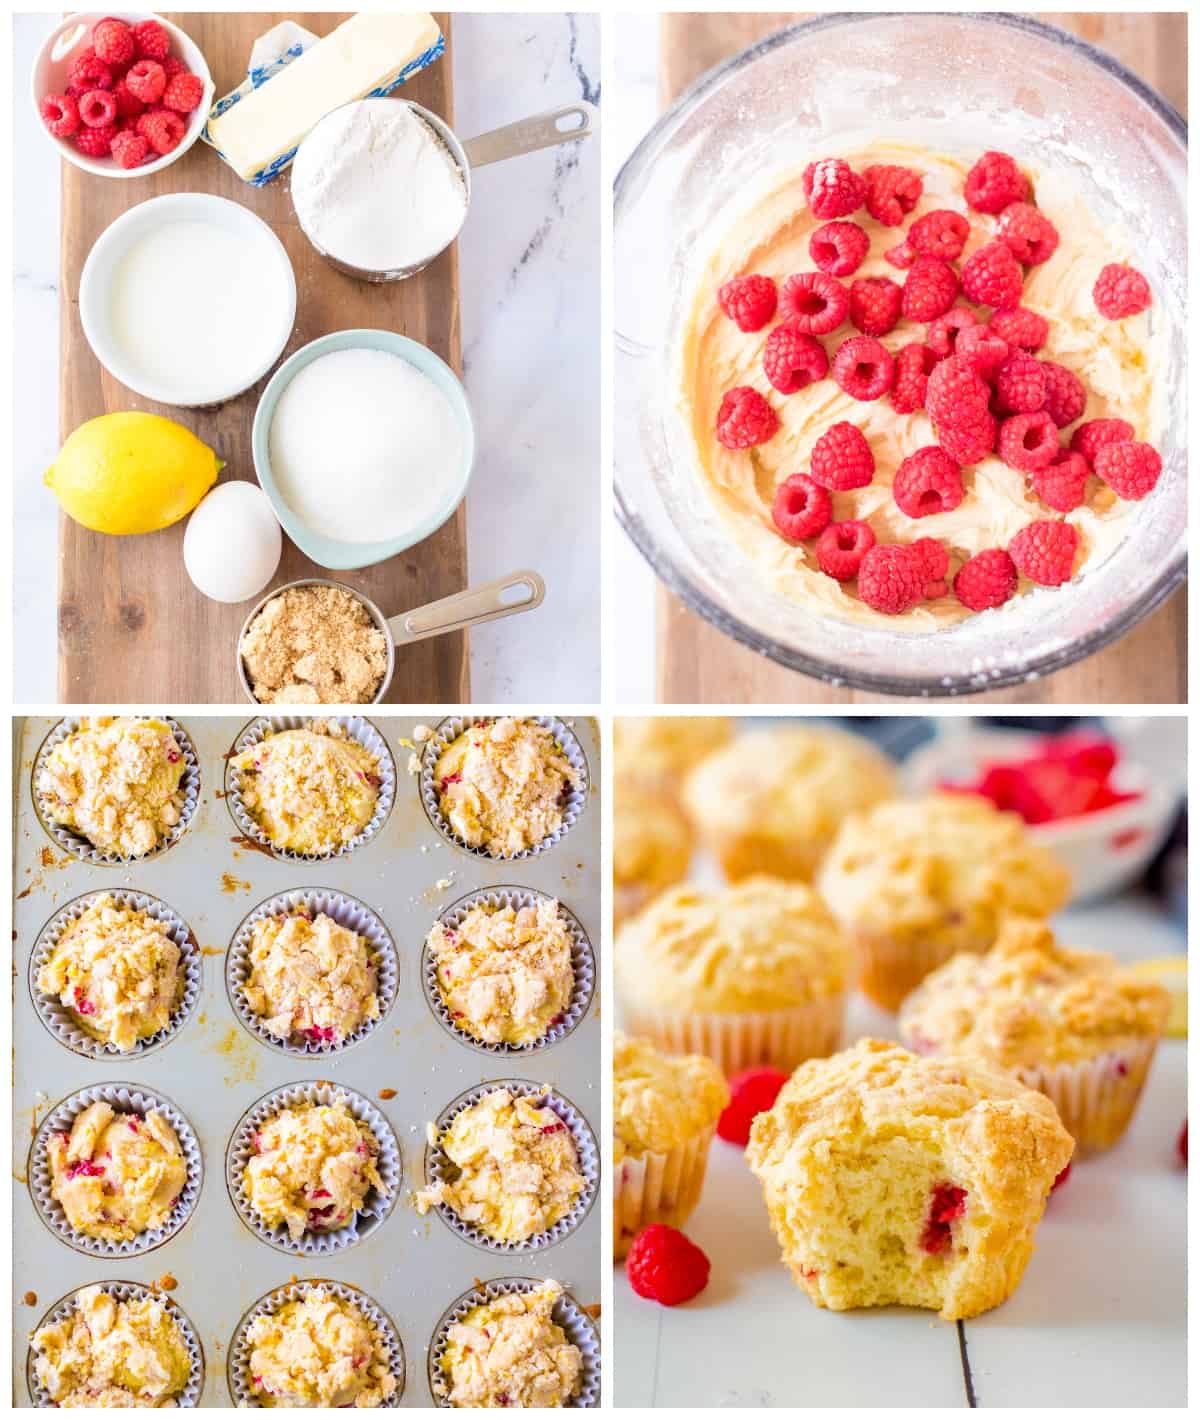 how to make lemon raspberry muffins step by step photo instructions